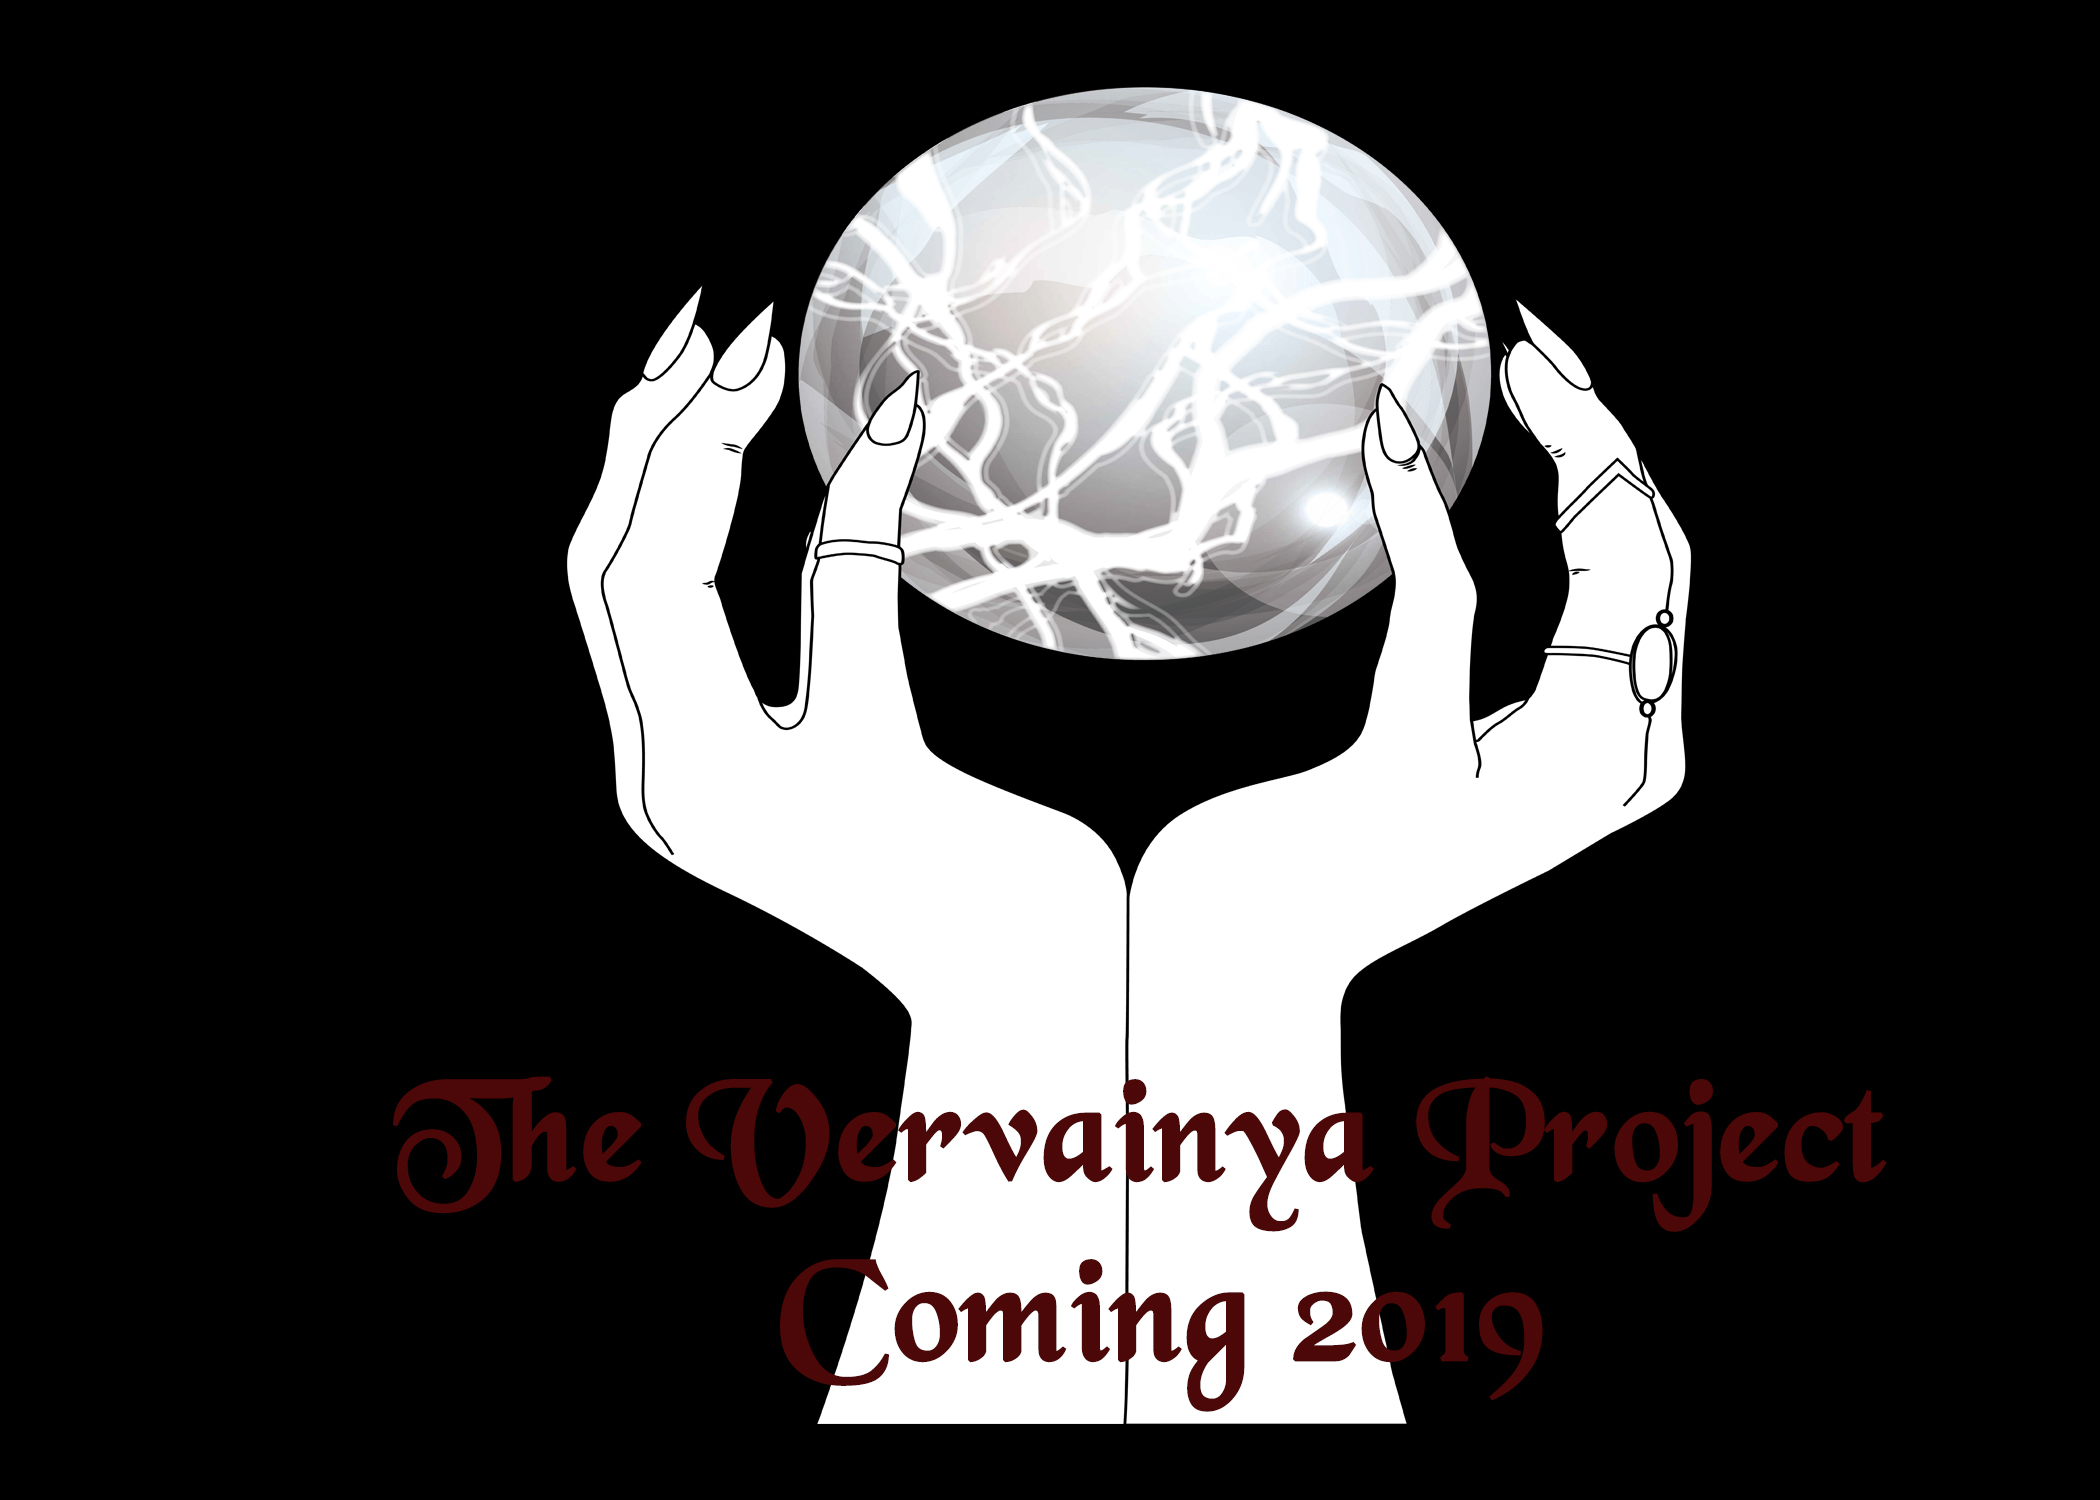 The Vervainya Project